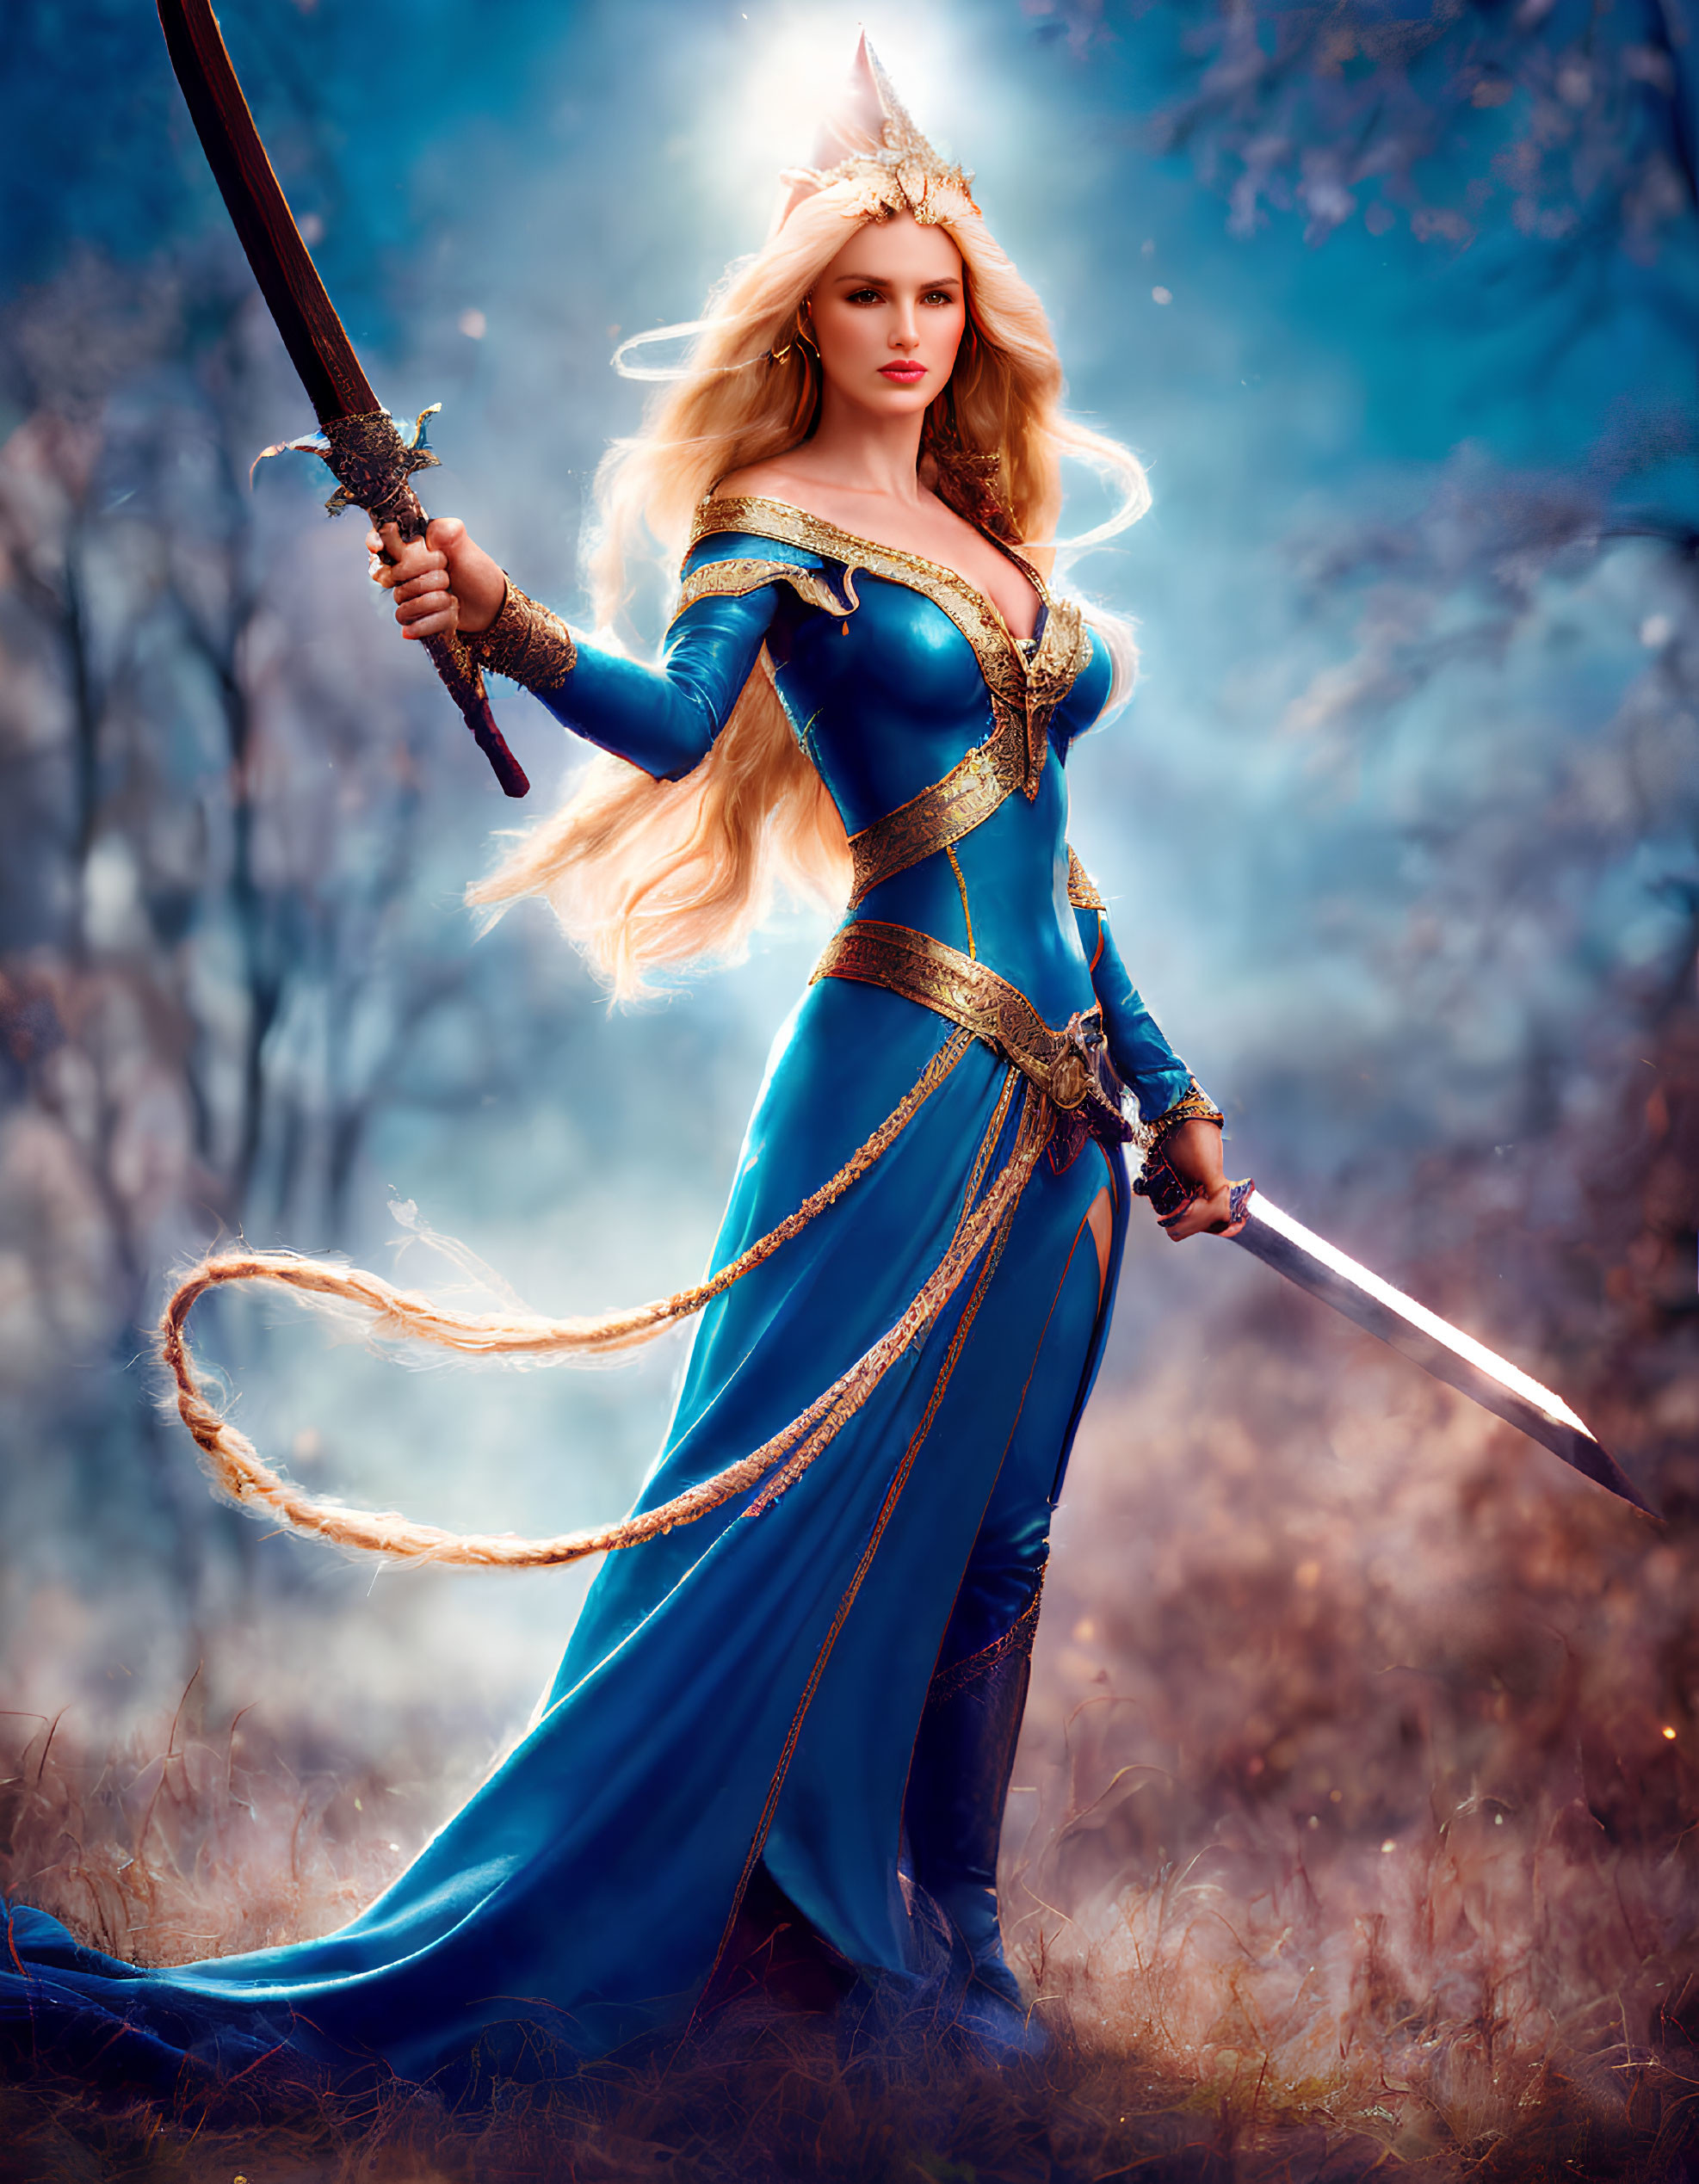 Woman in Blue Medieval Costume with Sword and Rope in Mystical Forest